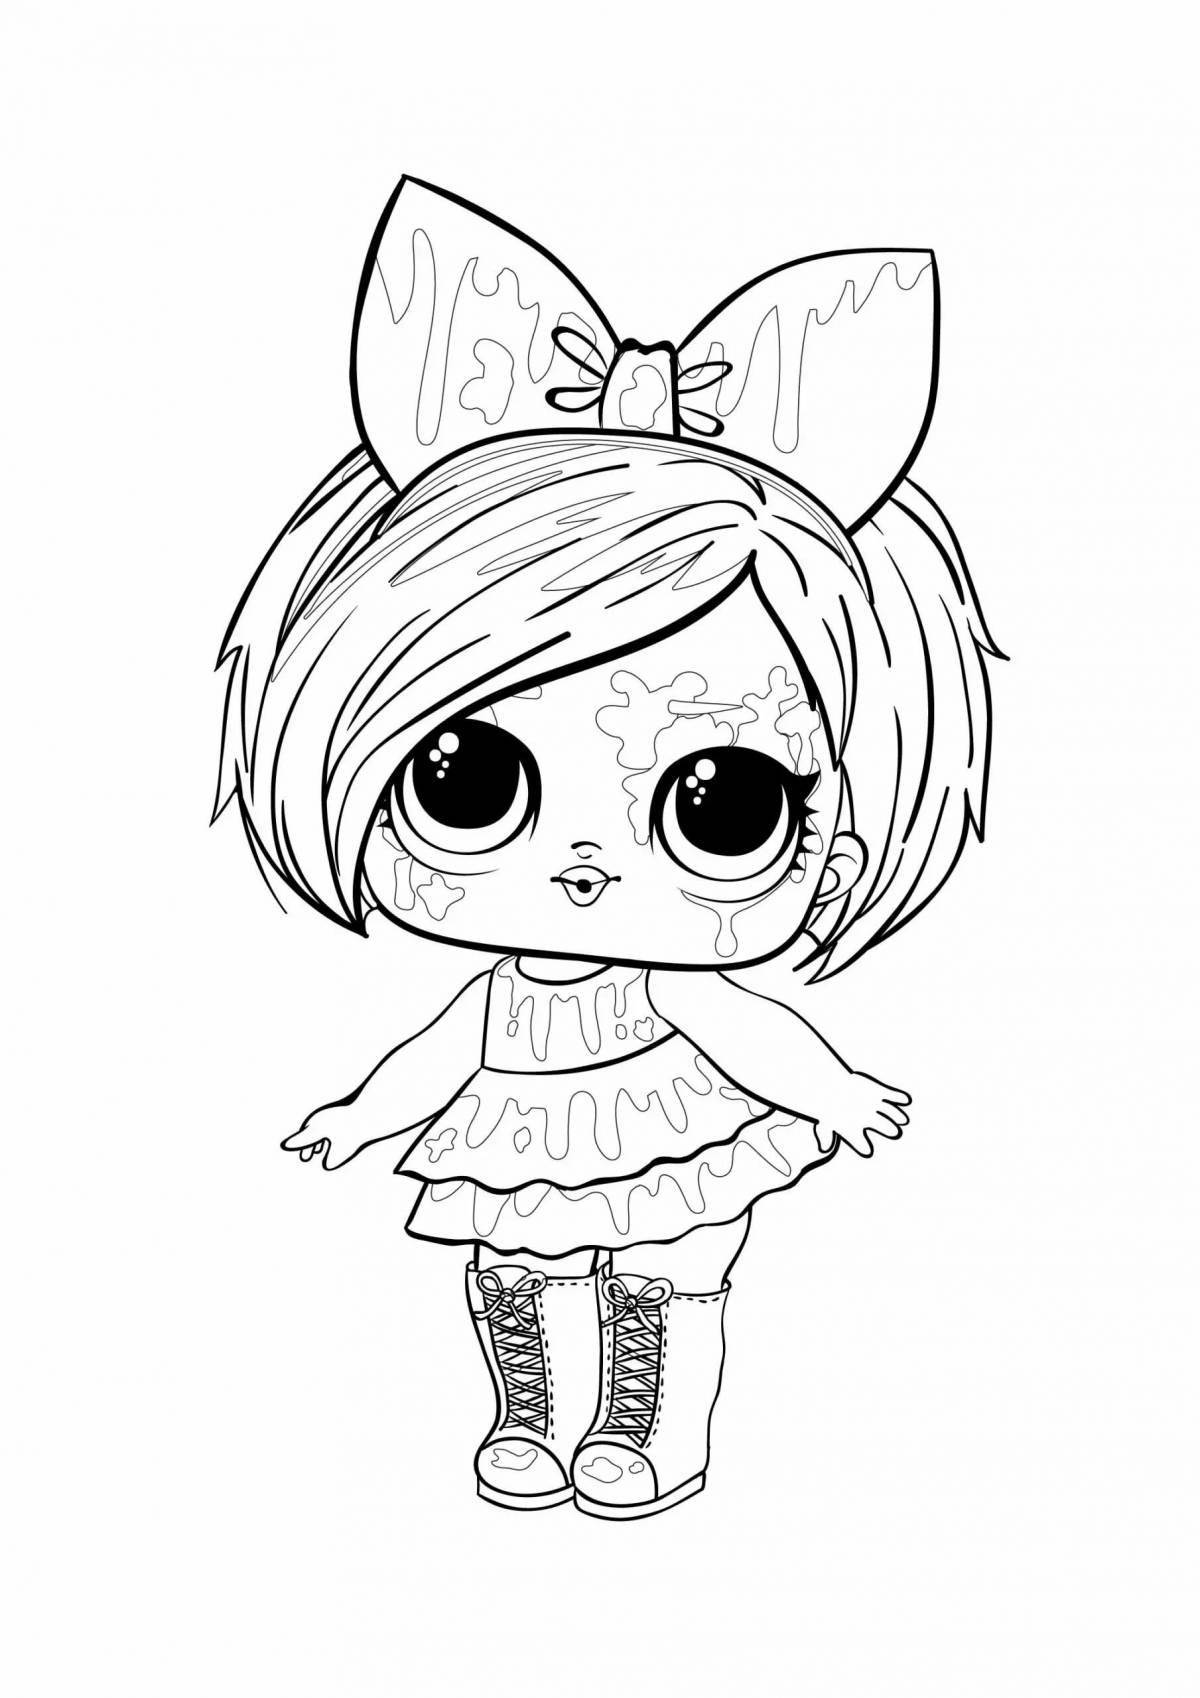 Dazzling lol doll coloring book